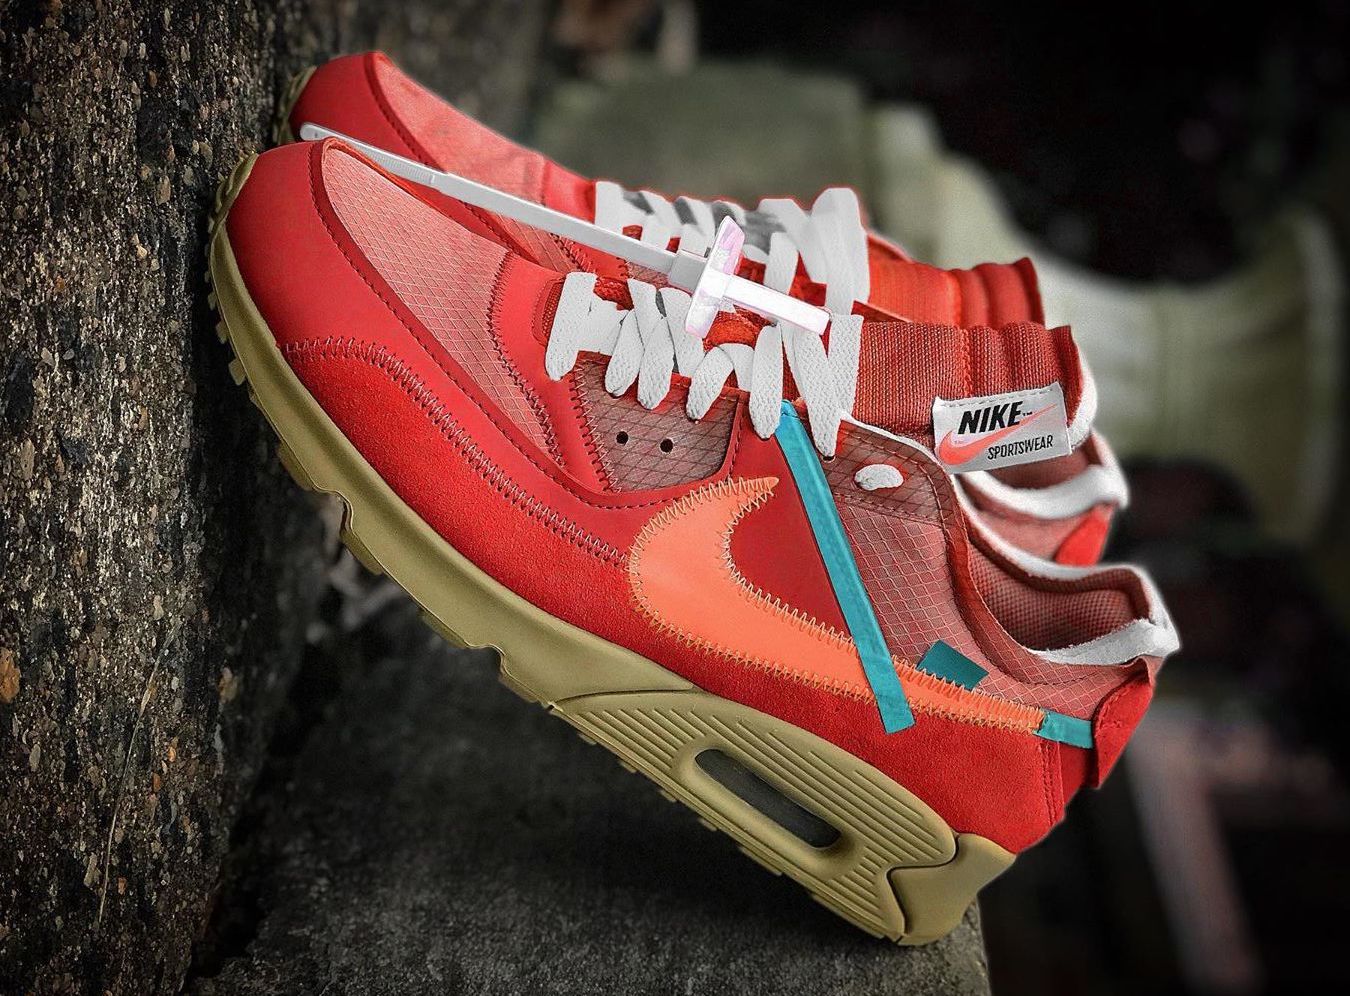 Pat foto Oude man New Off-White x Nike Air Max 90 Reportedly Releasing This Summer | Complex